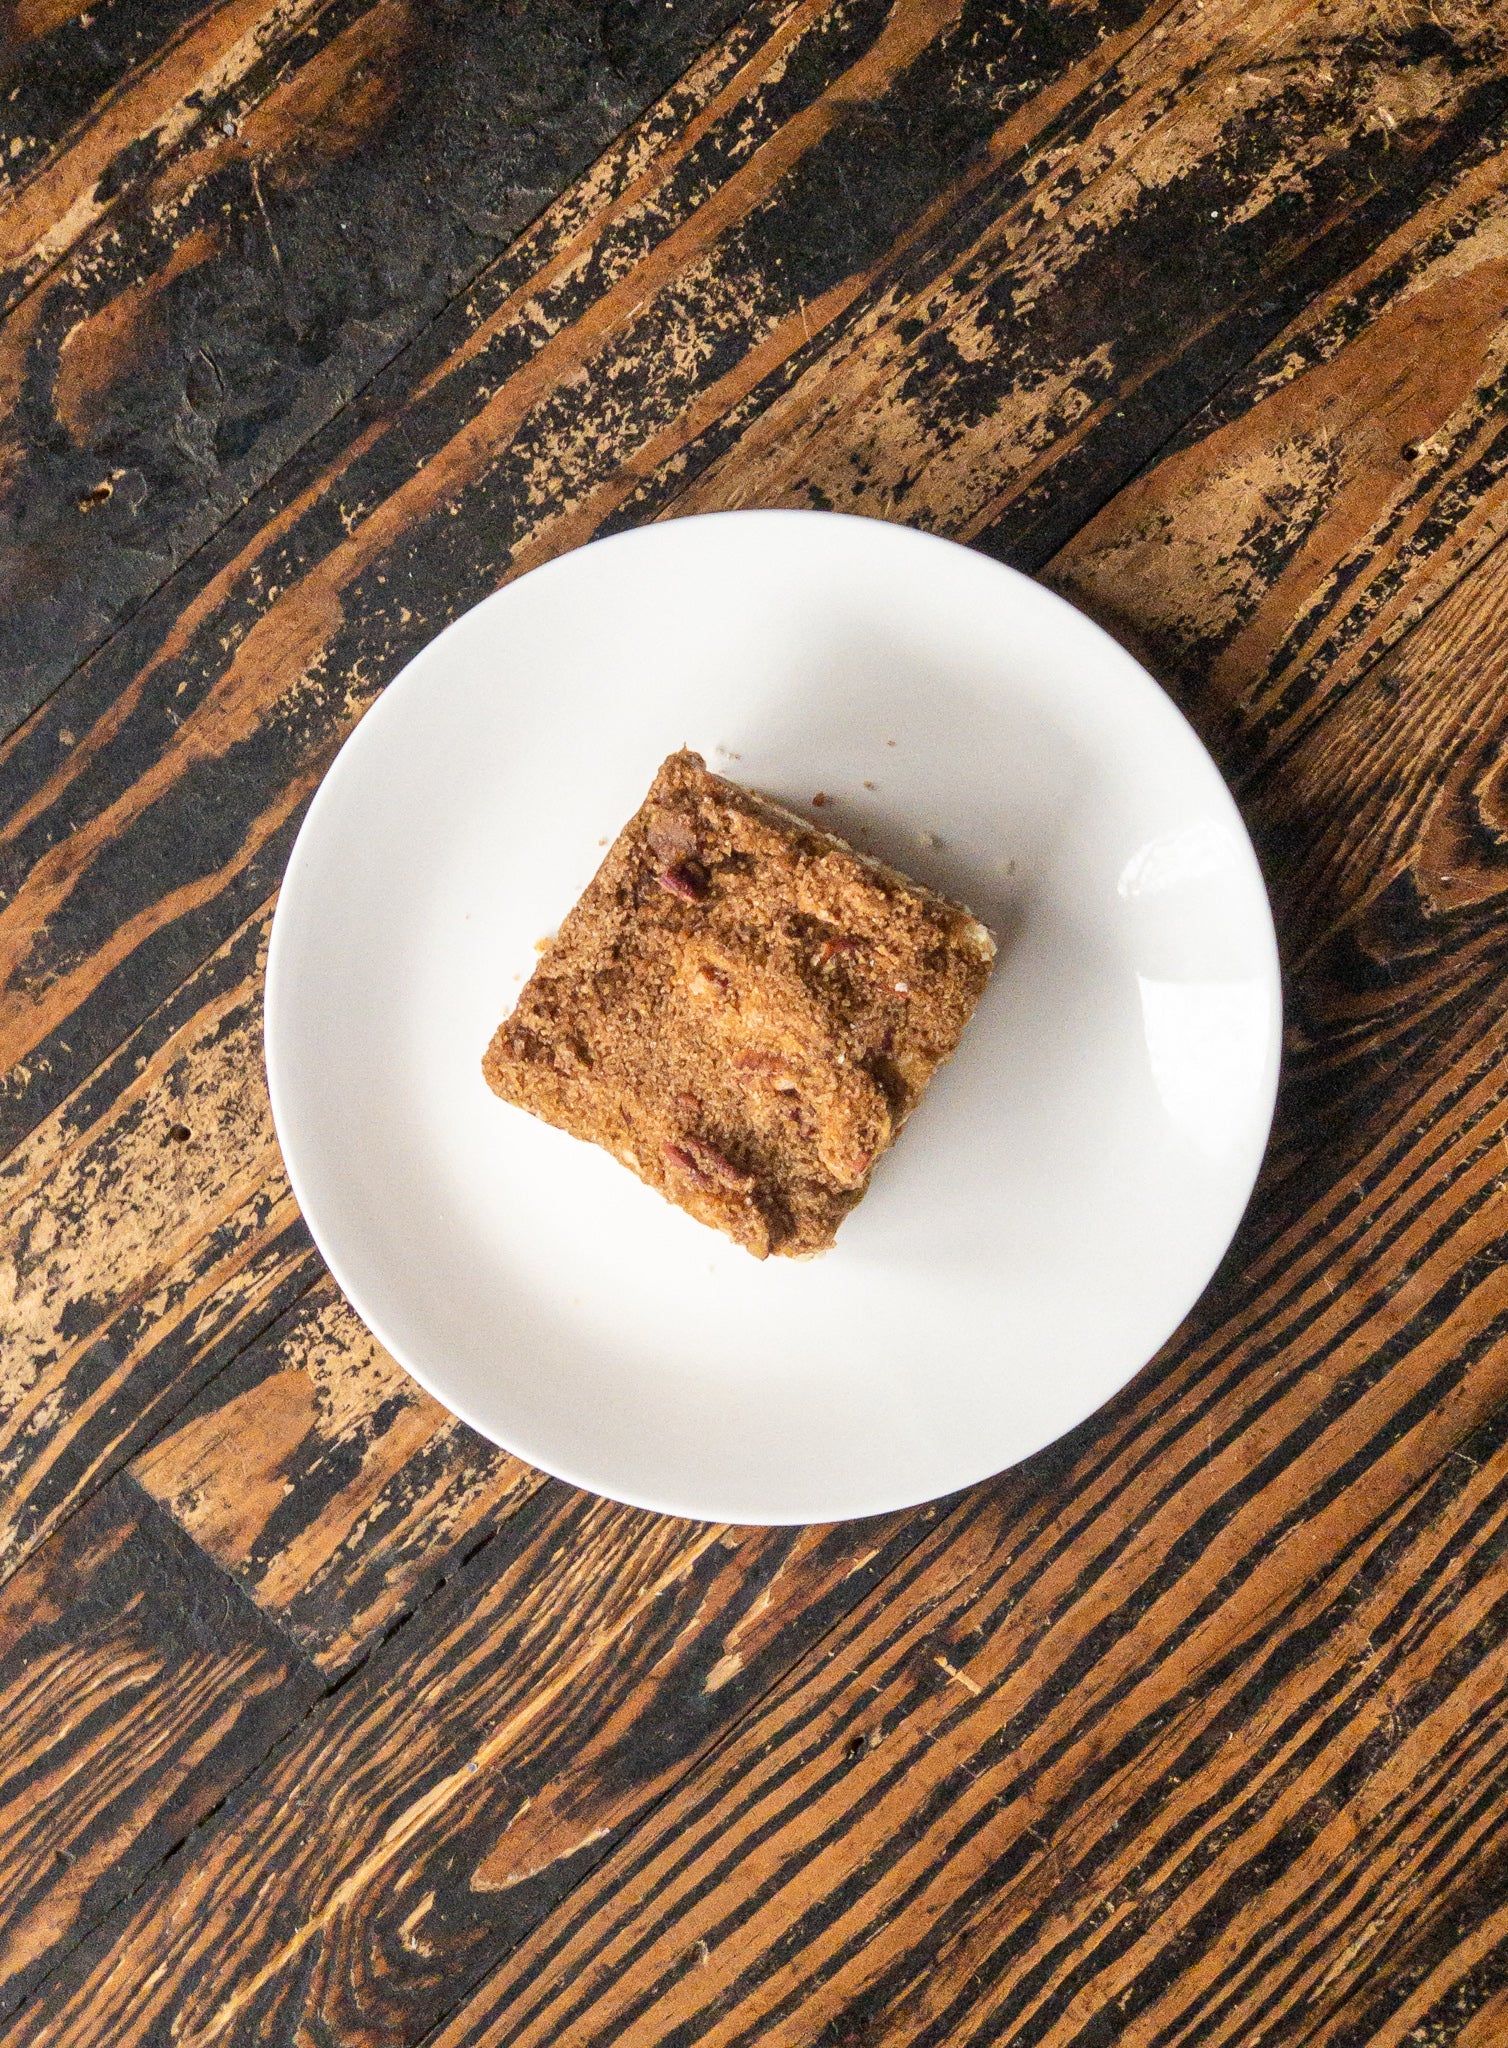 Gluten Free Coffee Cake Baked Goods - The Meeting Place on Market